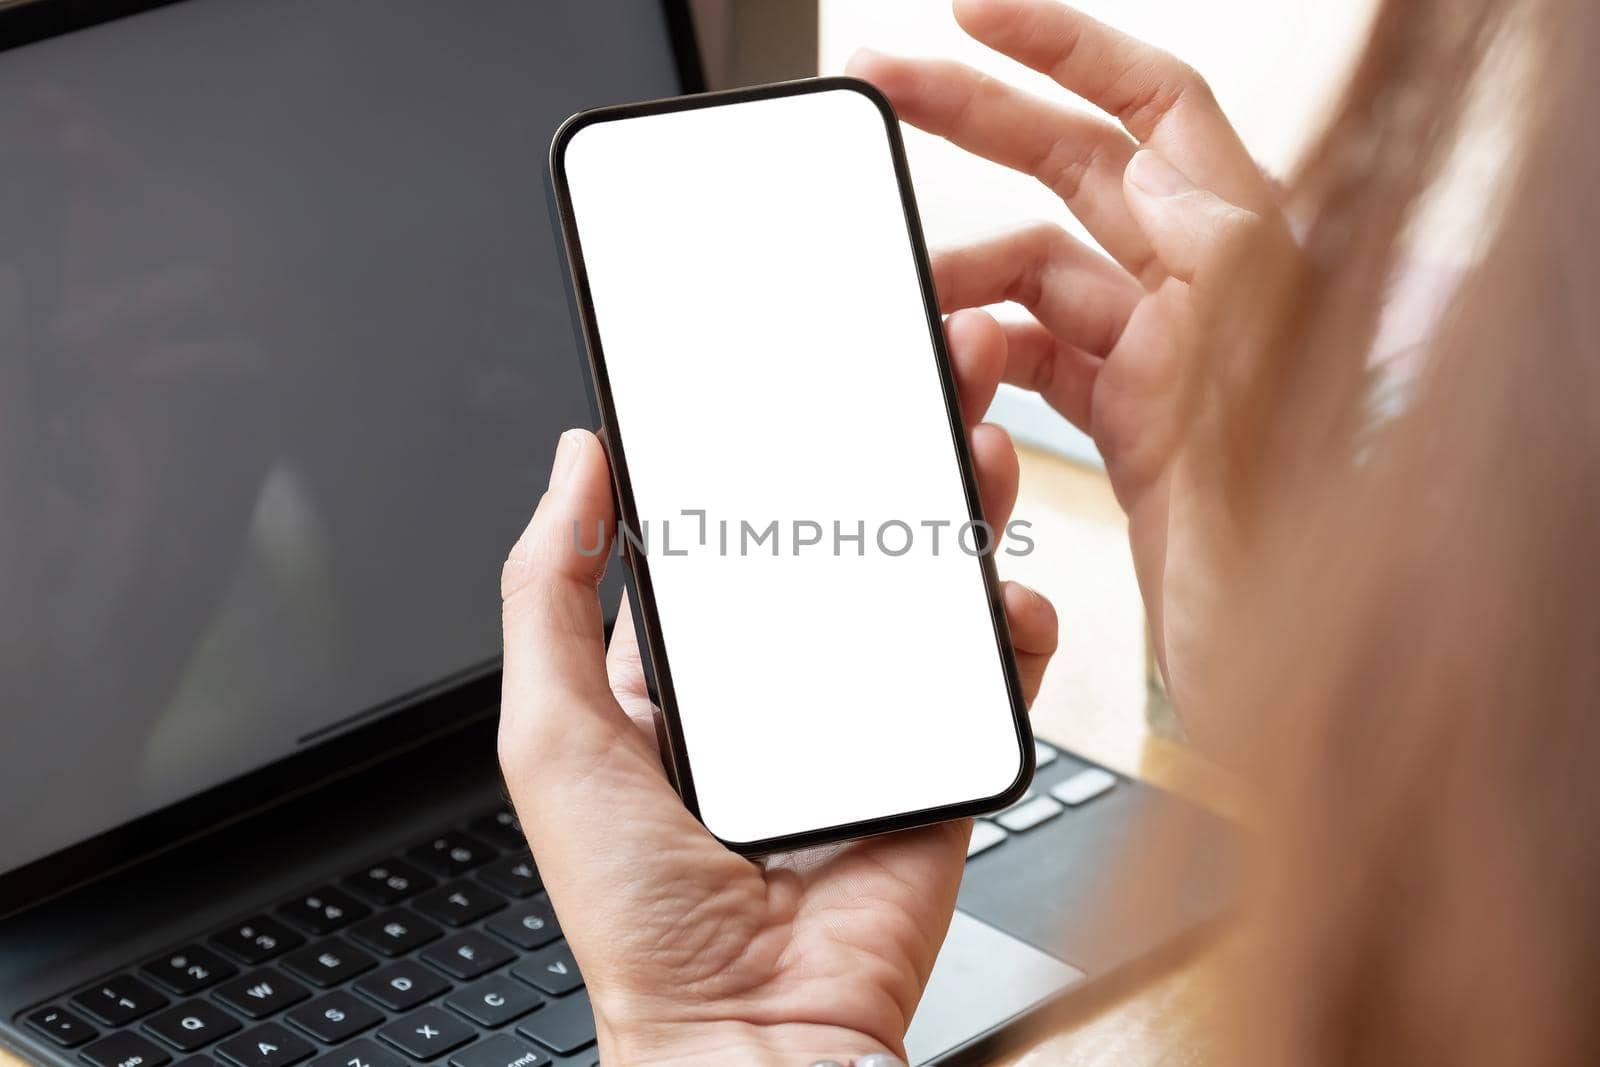 Top view of woman hand using smartphone with blank white screen.